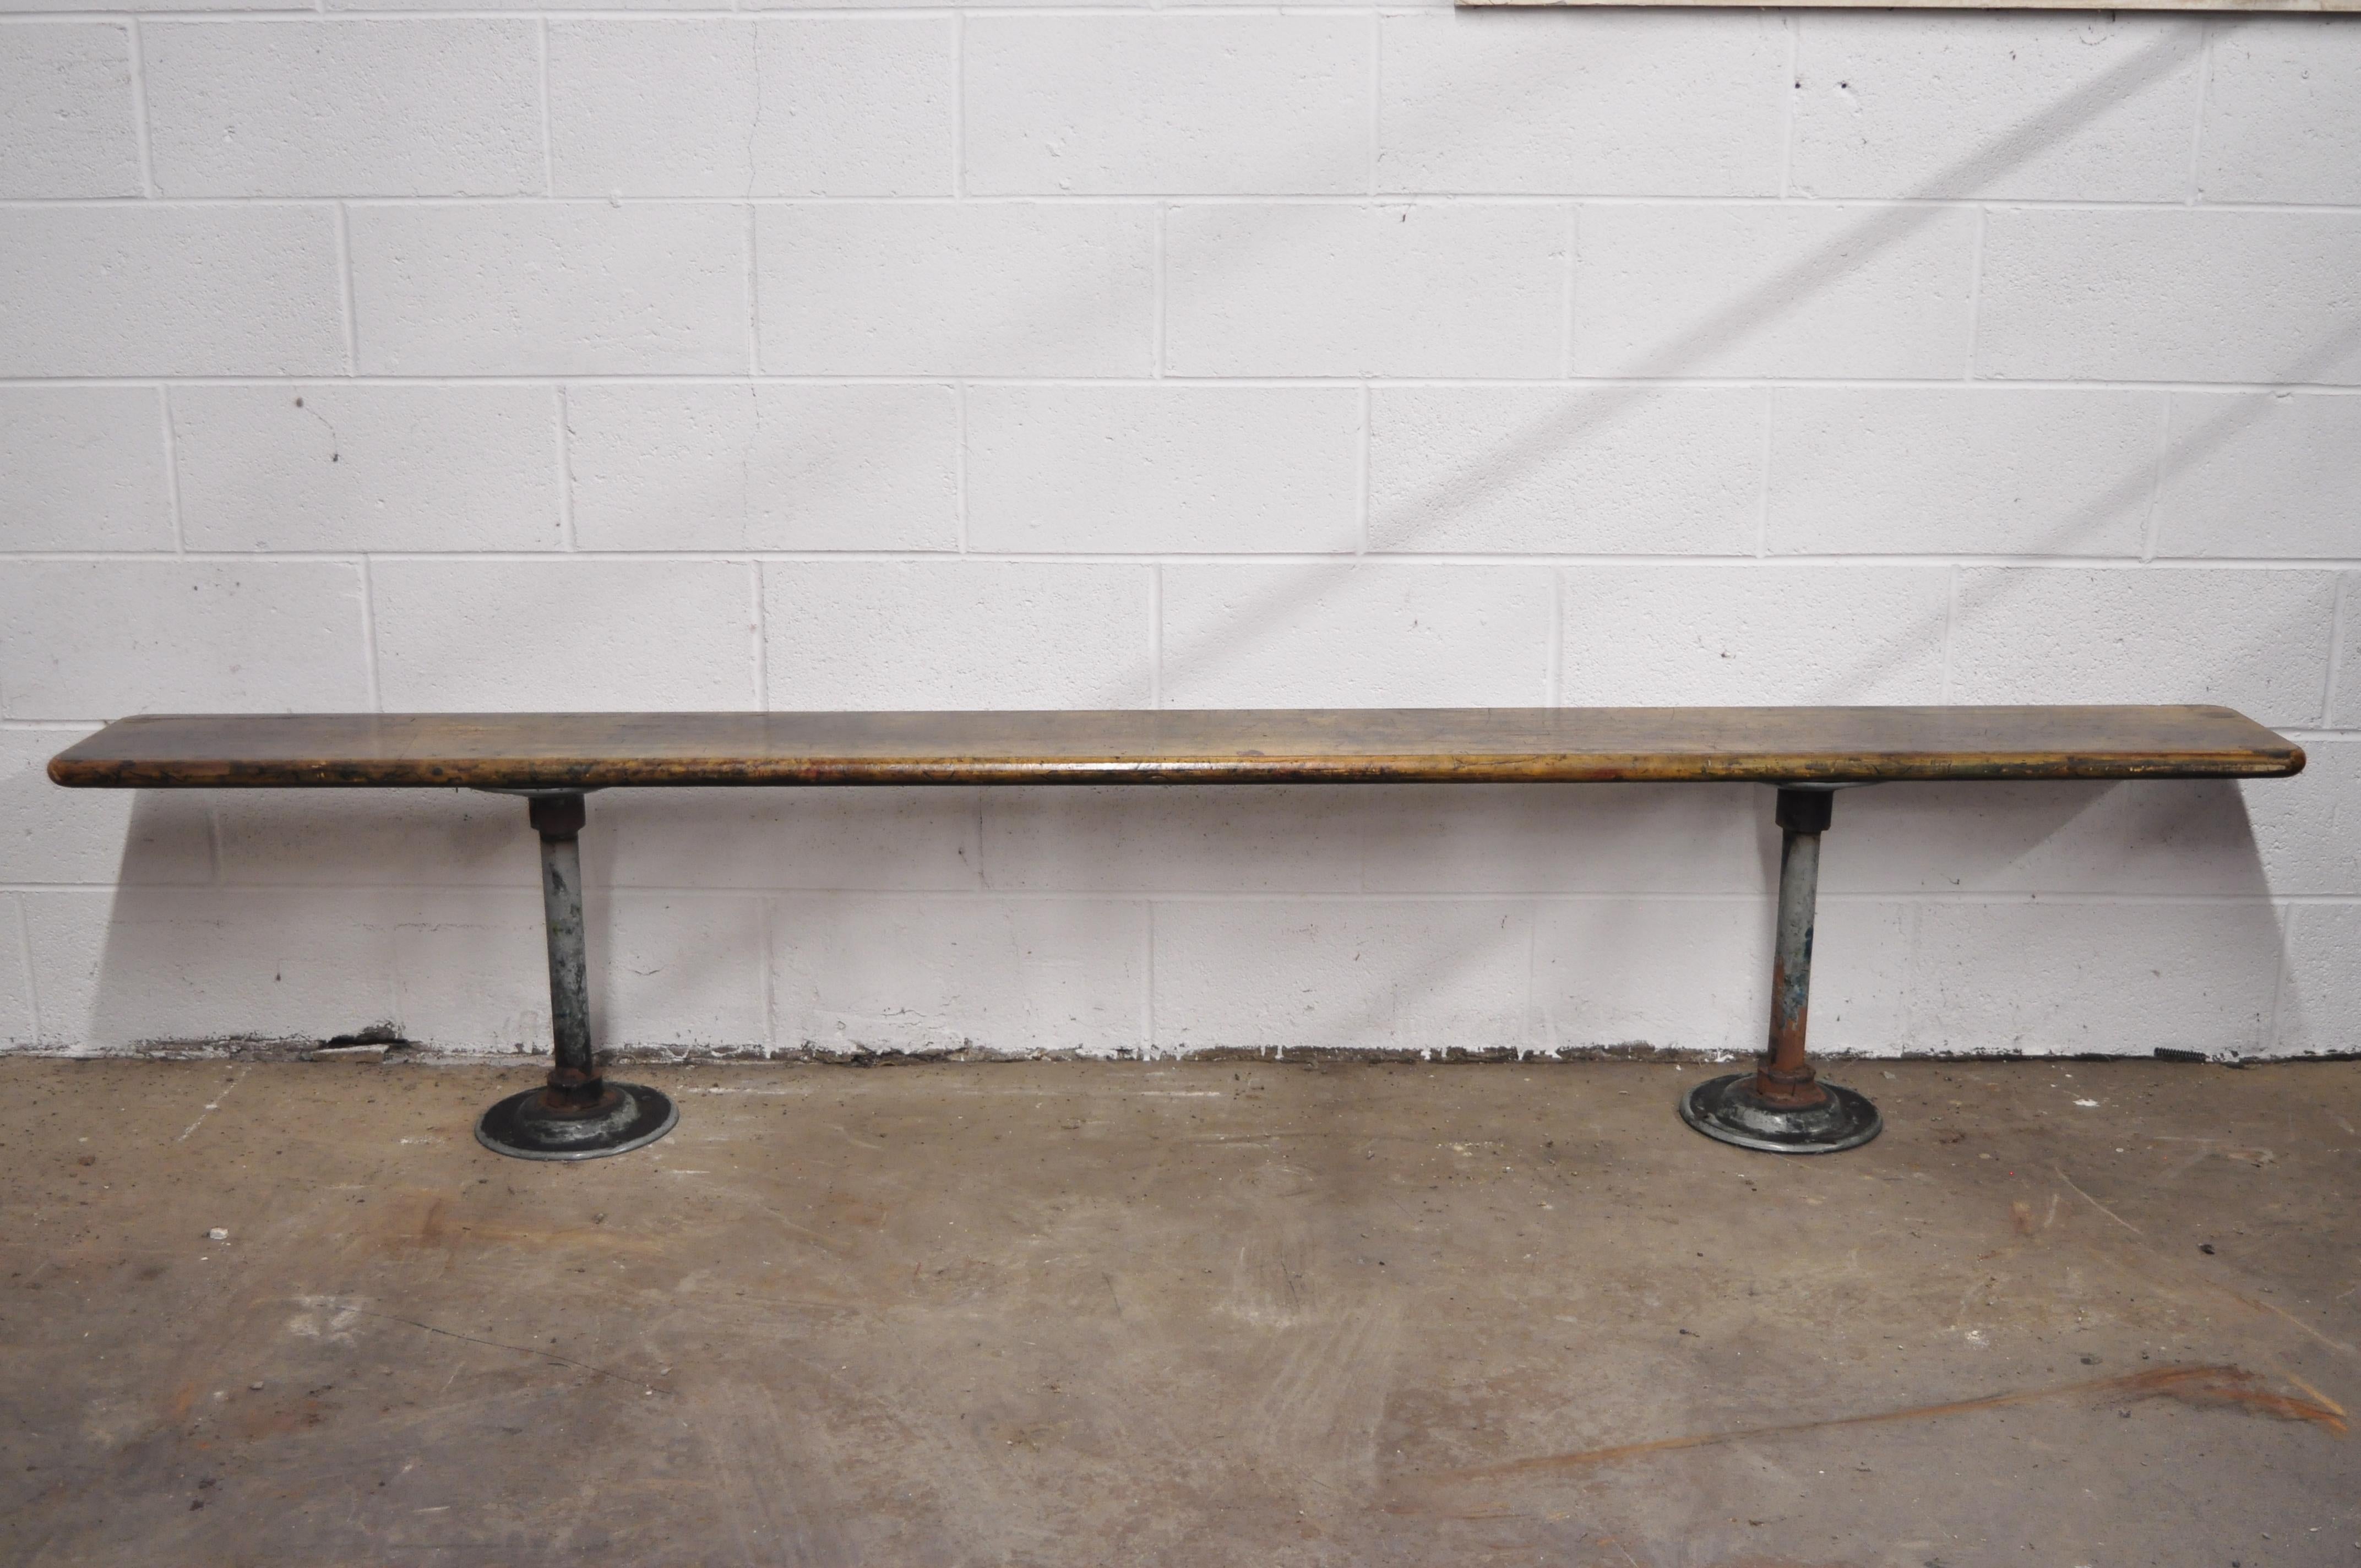 Vintage American Industrial Long Gym Seat Butcher Block Wood and Steel Bench 5